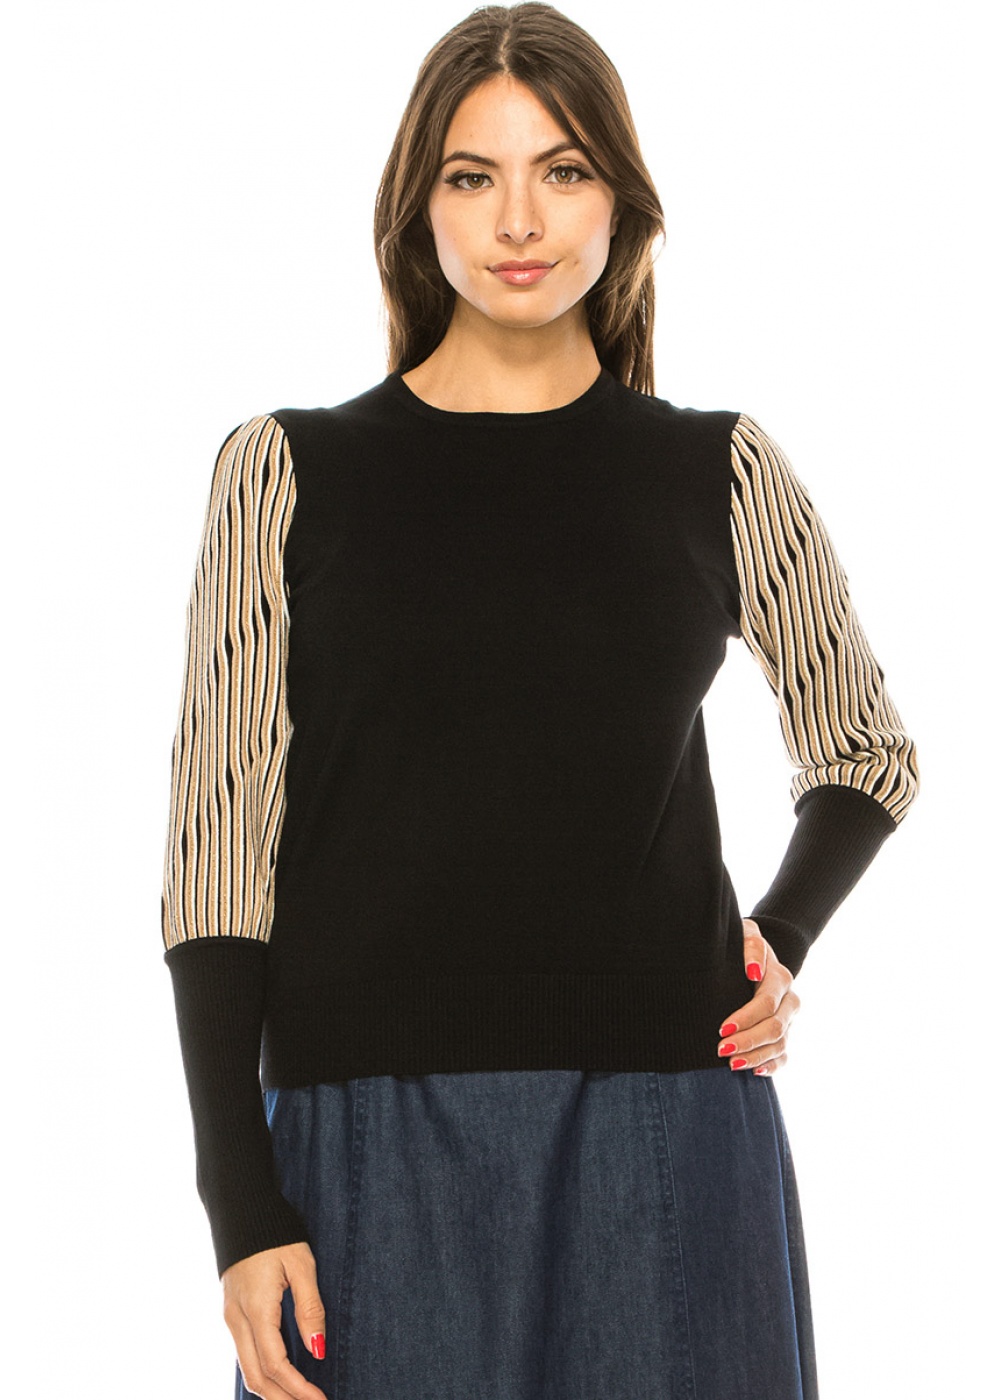 Striped Leg-Of-Mutton Sleeves Sweater